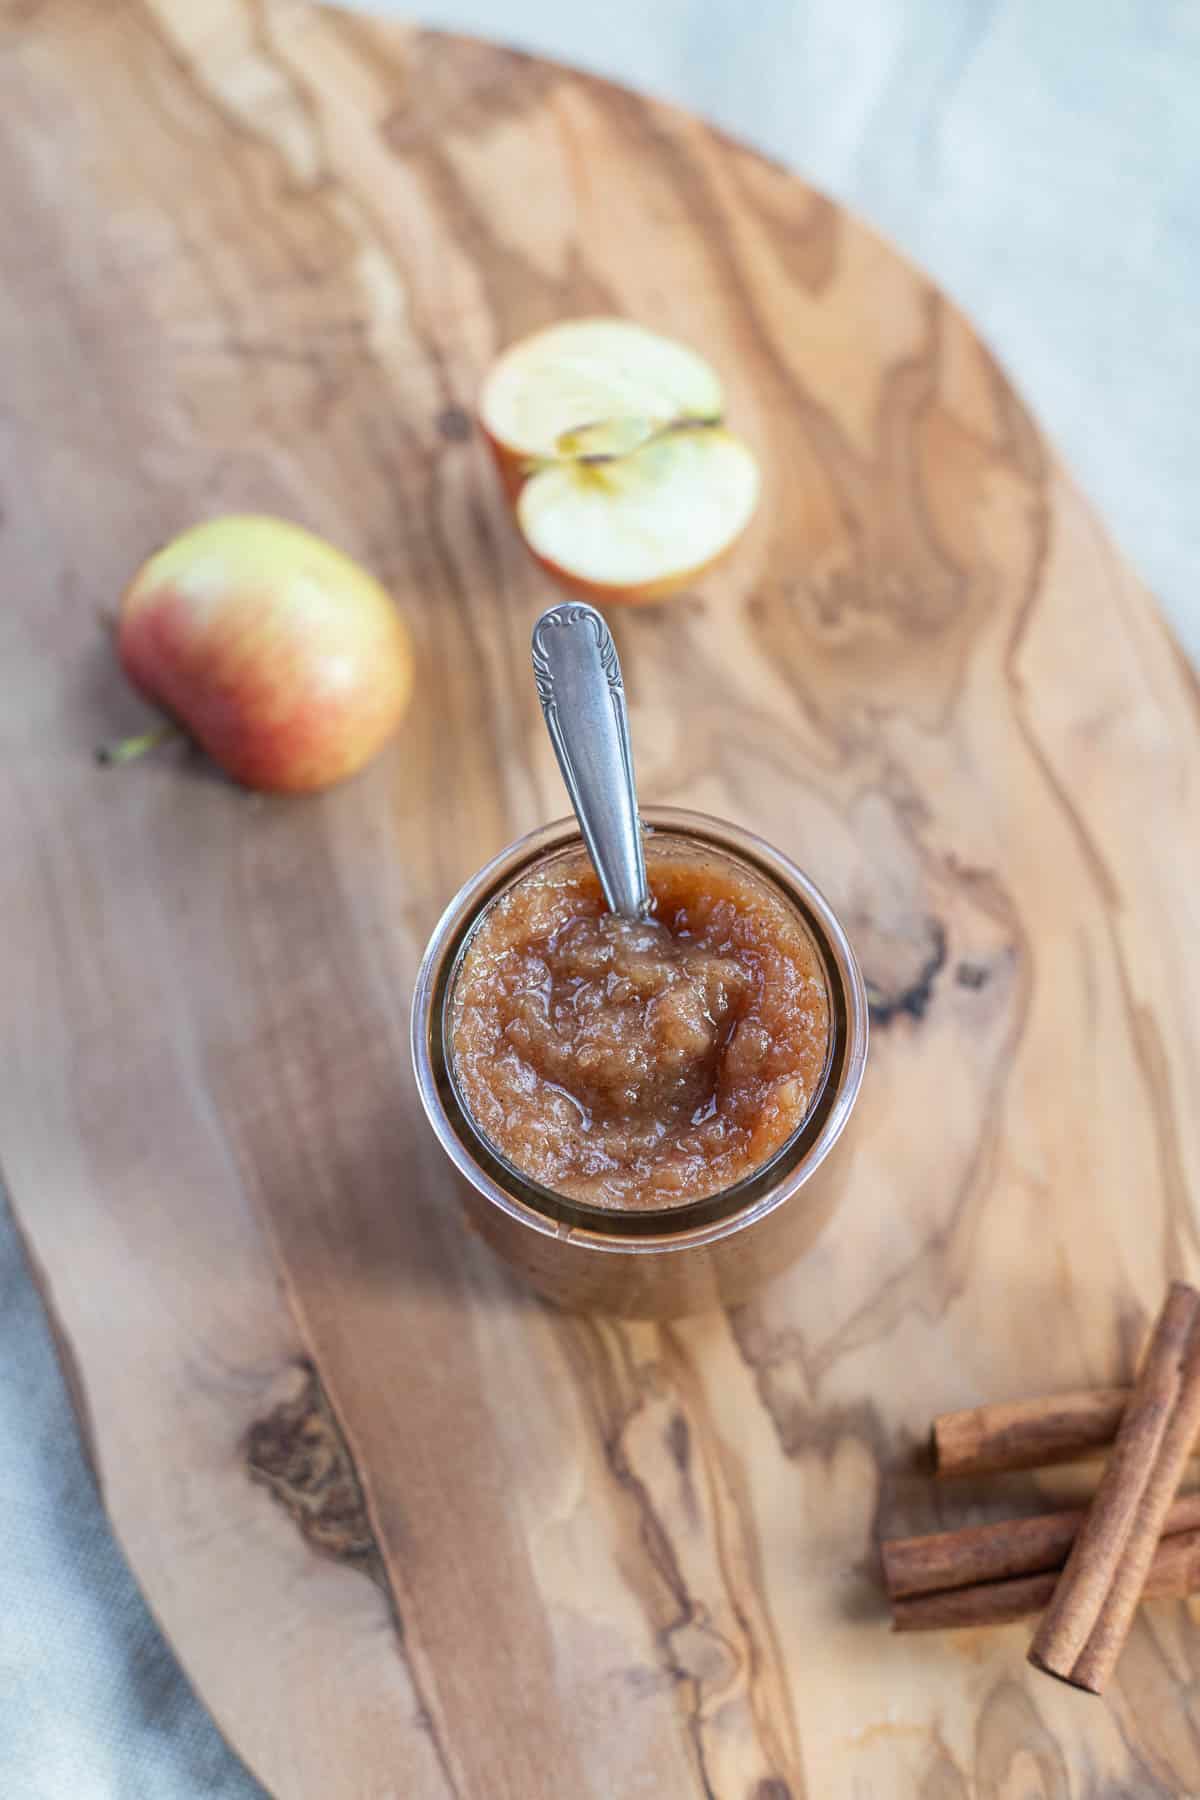 applesauce in a jar with a sliced apple